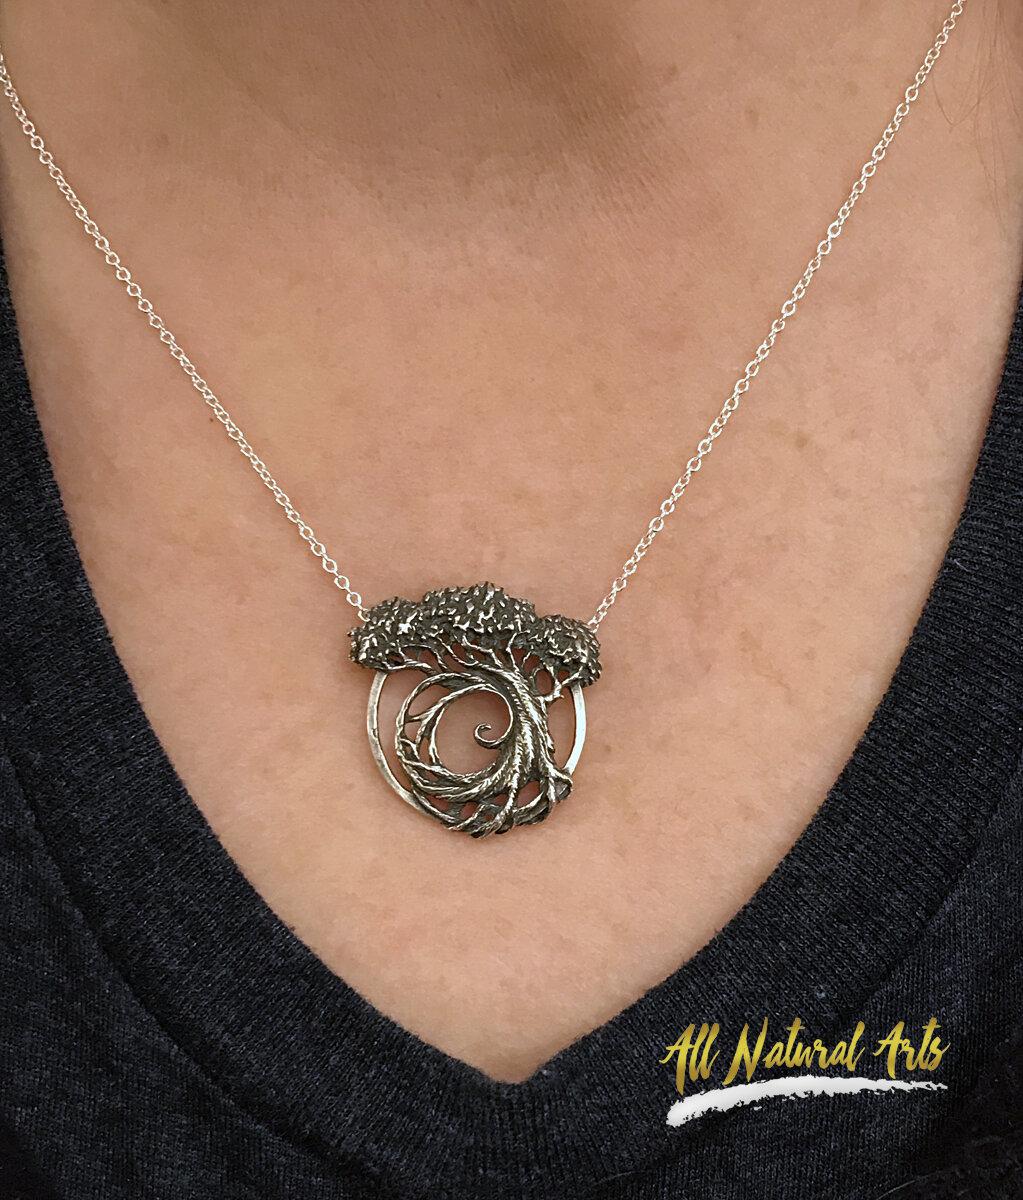 Girl wearing Sue Beatrice's Tree of Life pendant with Fibonacci Spiral on a silver chain.